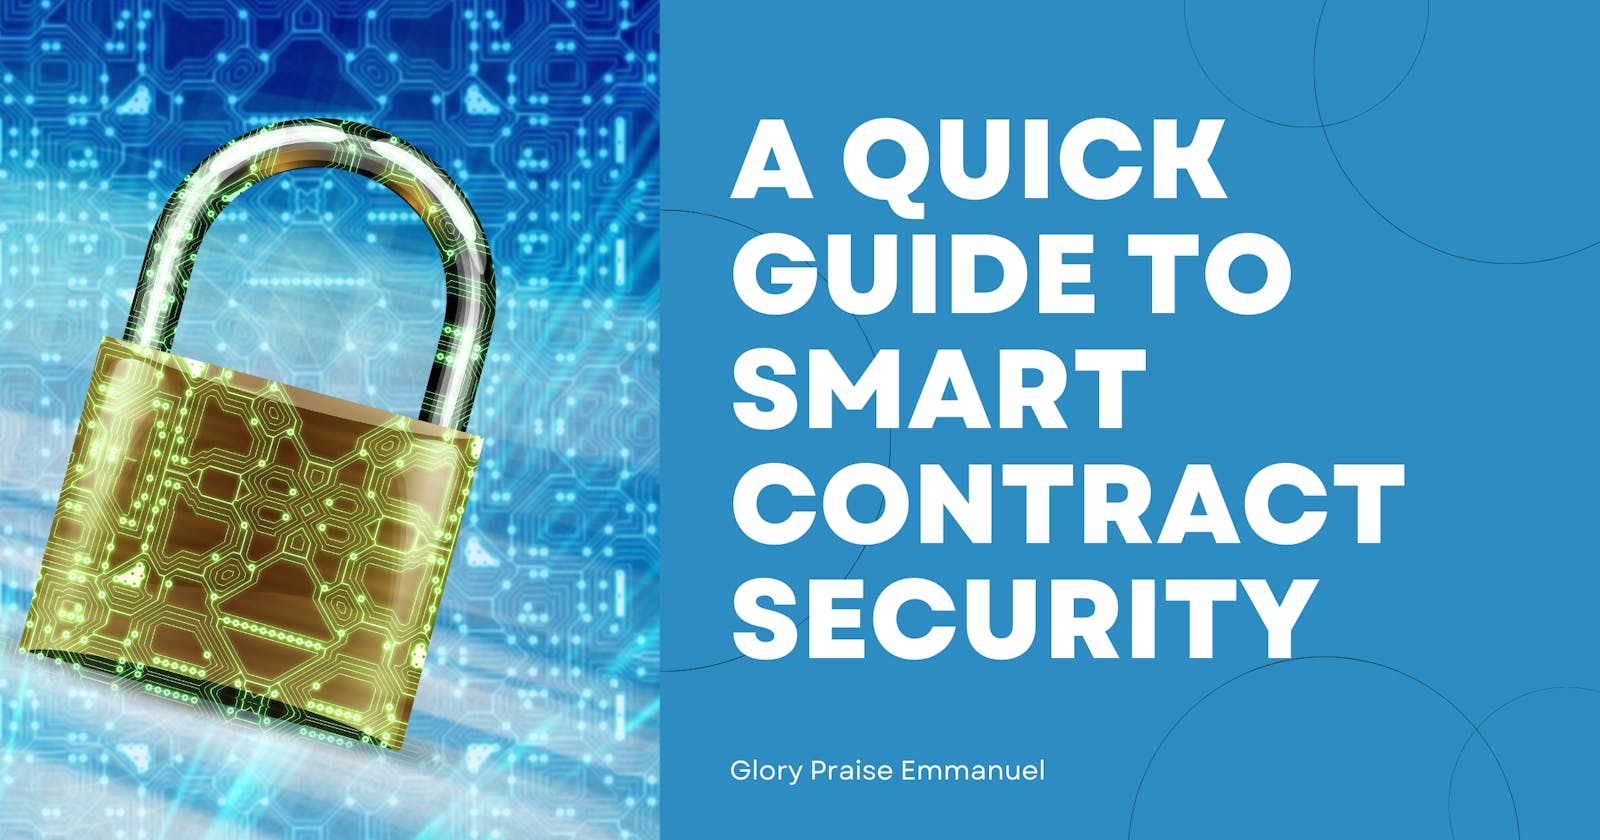 A Quick Guide to Smart Contract Security